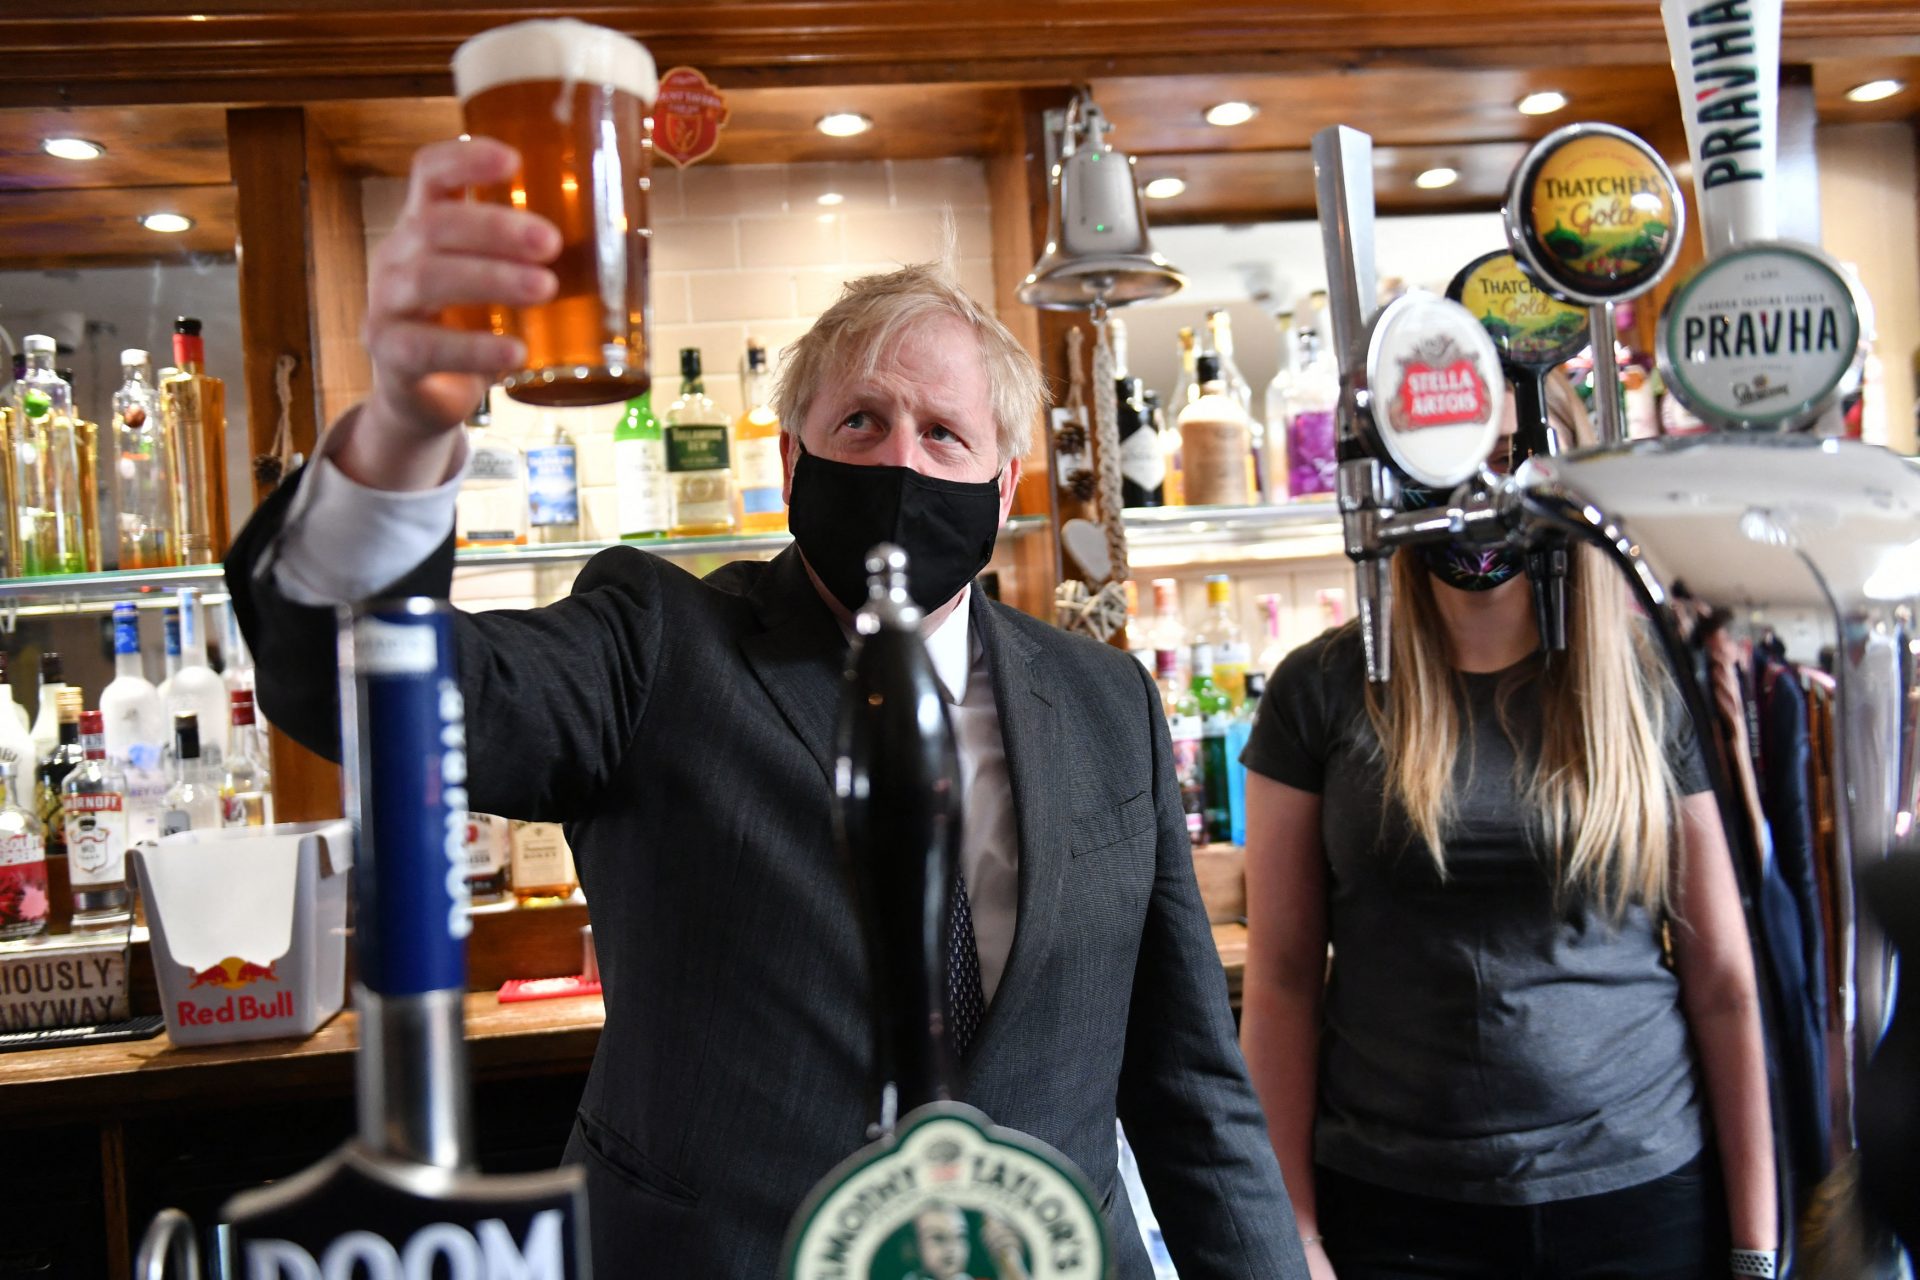 Bighead with a big head: Boris Johnson during a visit to The Mount Tavern pub and restaurant in Wolverhampton. Photo by Jacob King/POOL/AFP via Getty Images.